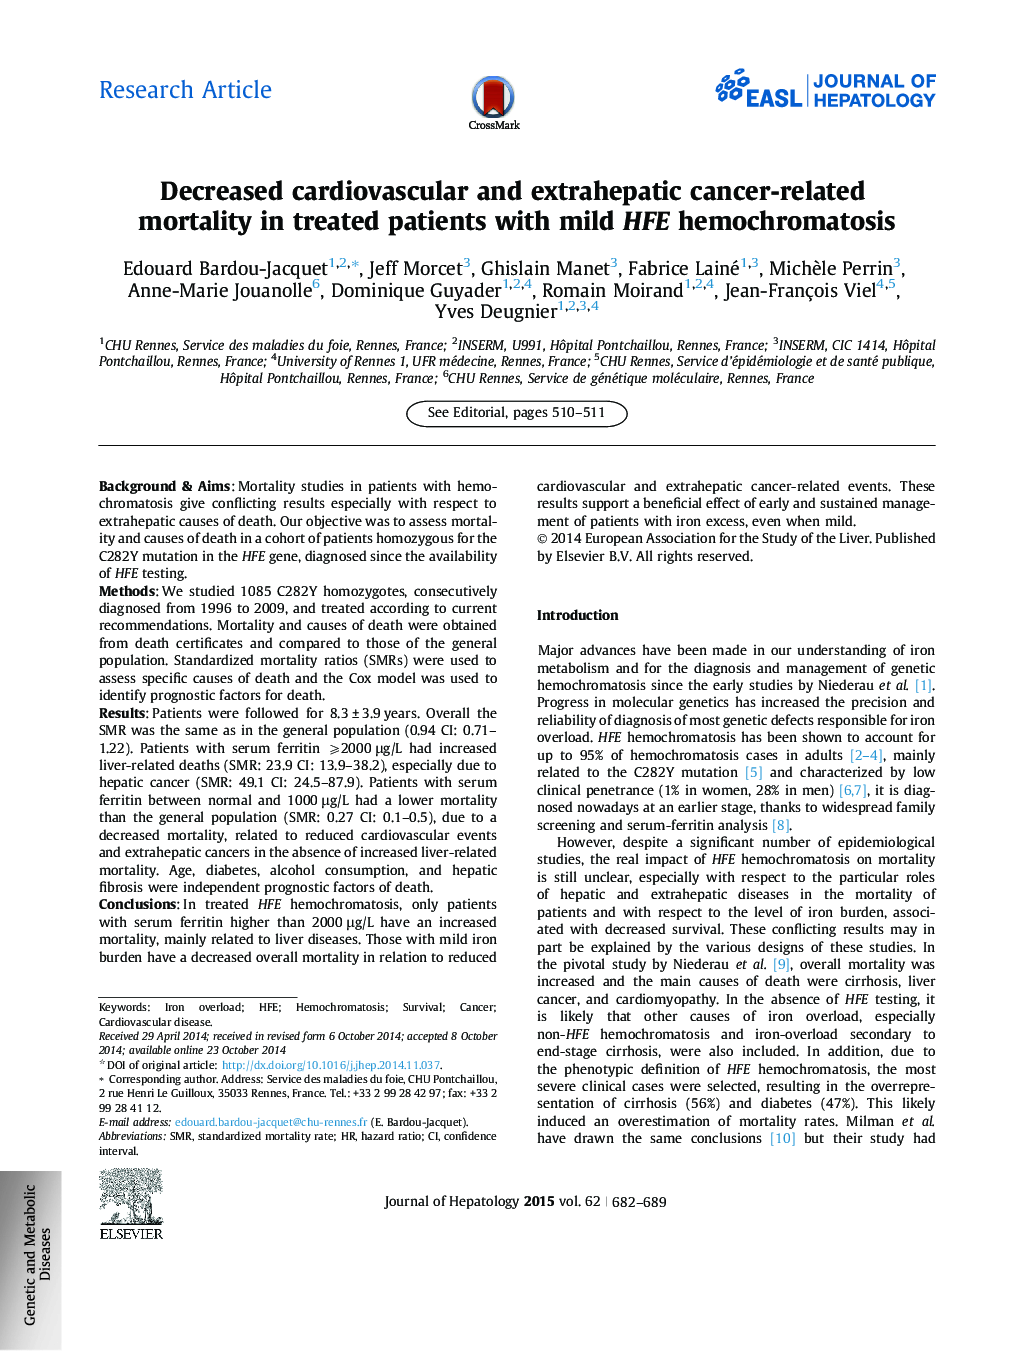 Research ArticleDecreased cardiovascular and extrahepatic cancer-related mortality in treated patients with mild HFE hemochromatosis